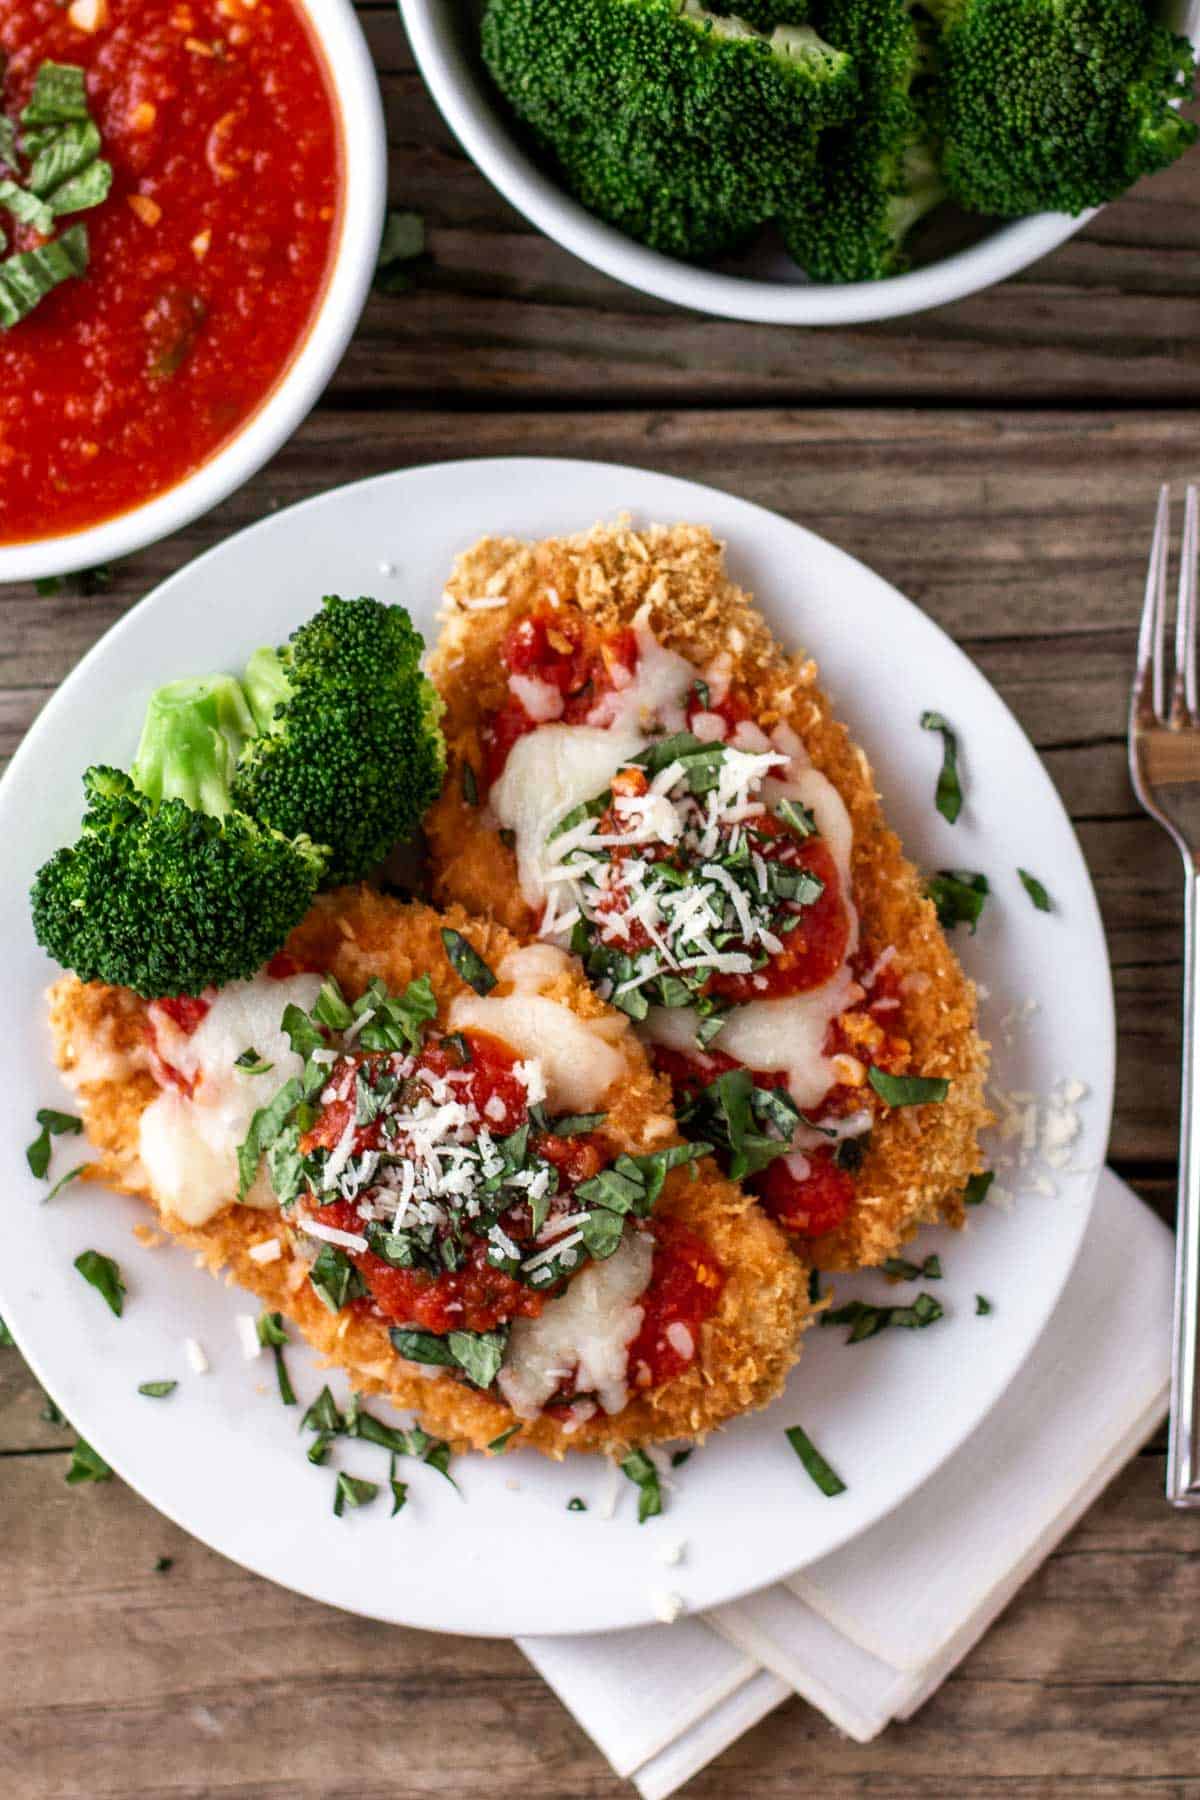 Baked Chicken parmesan with roasted broccoli and marinara sauce from the top view.